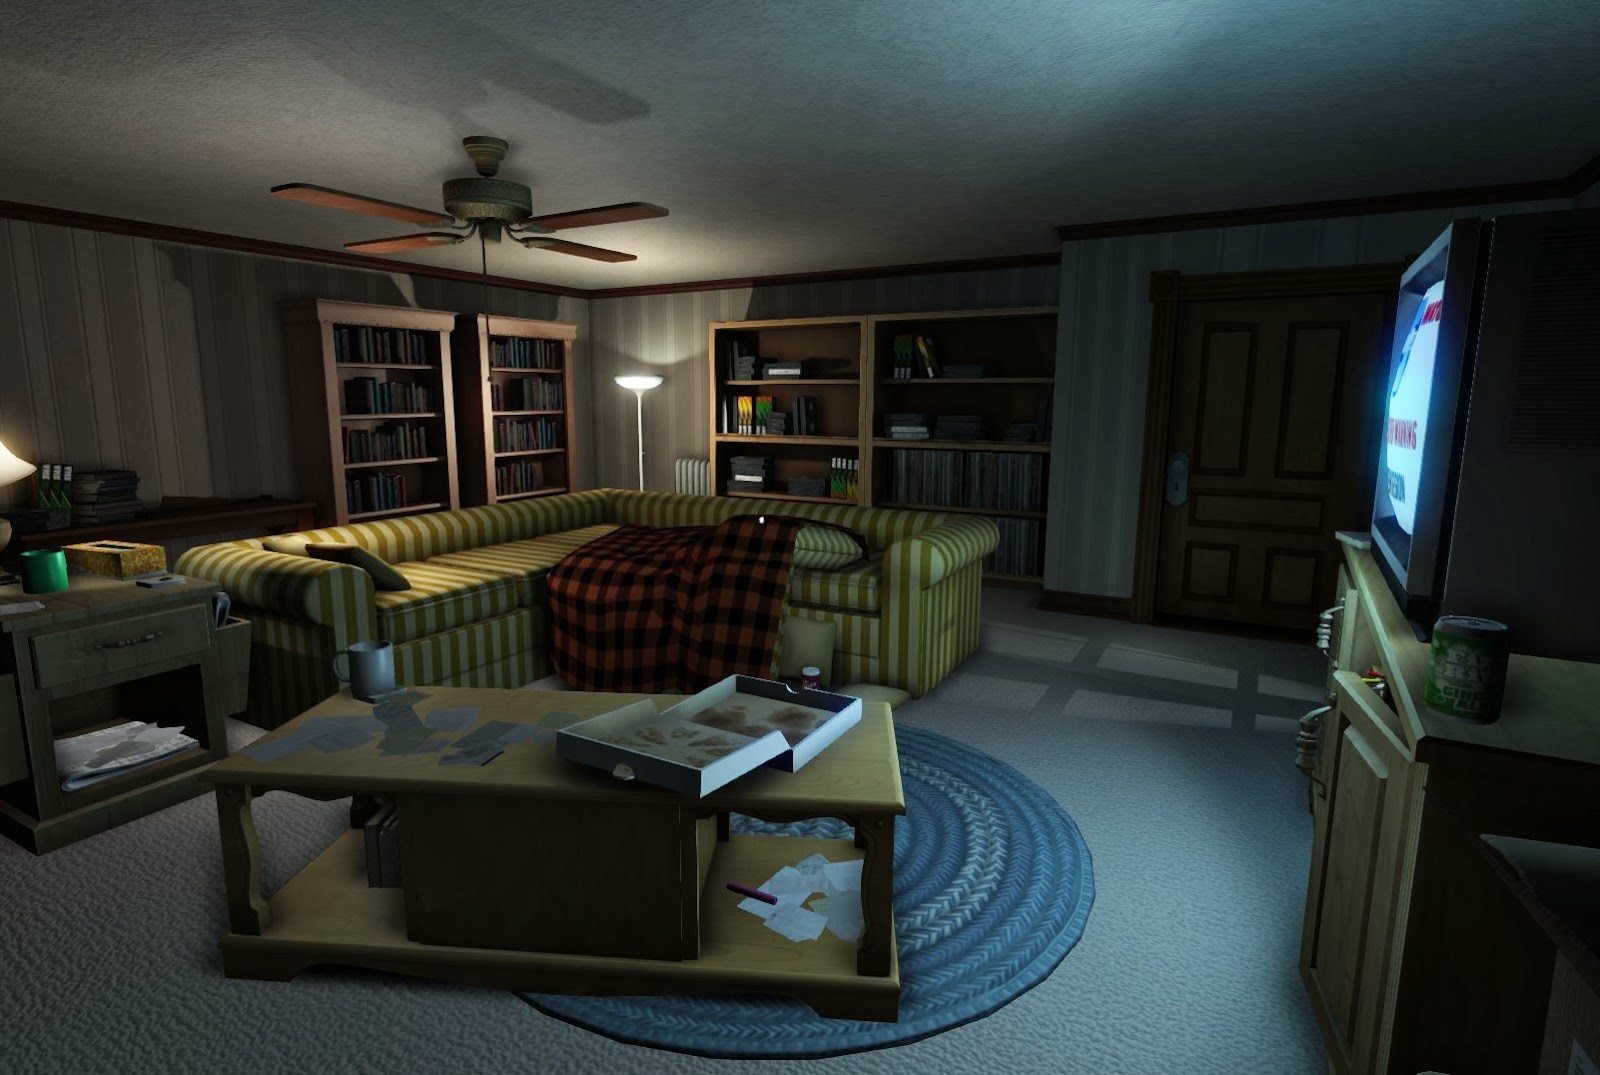 Gone home game